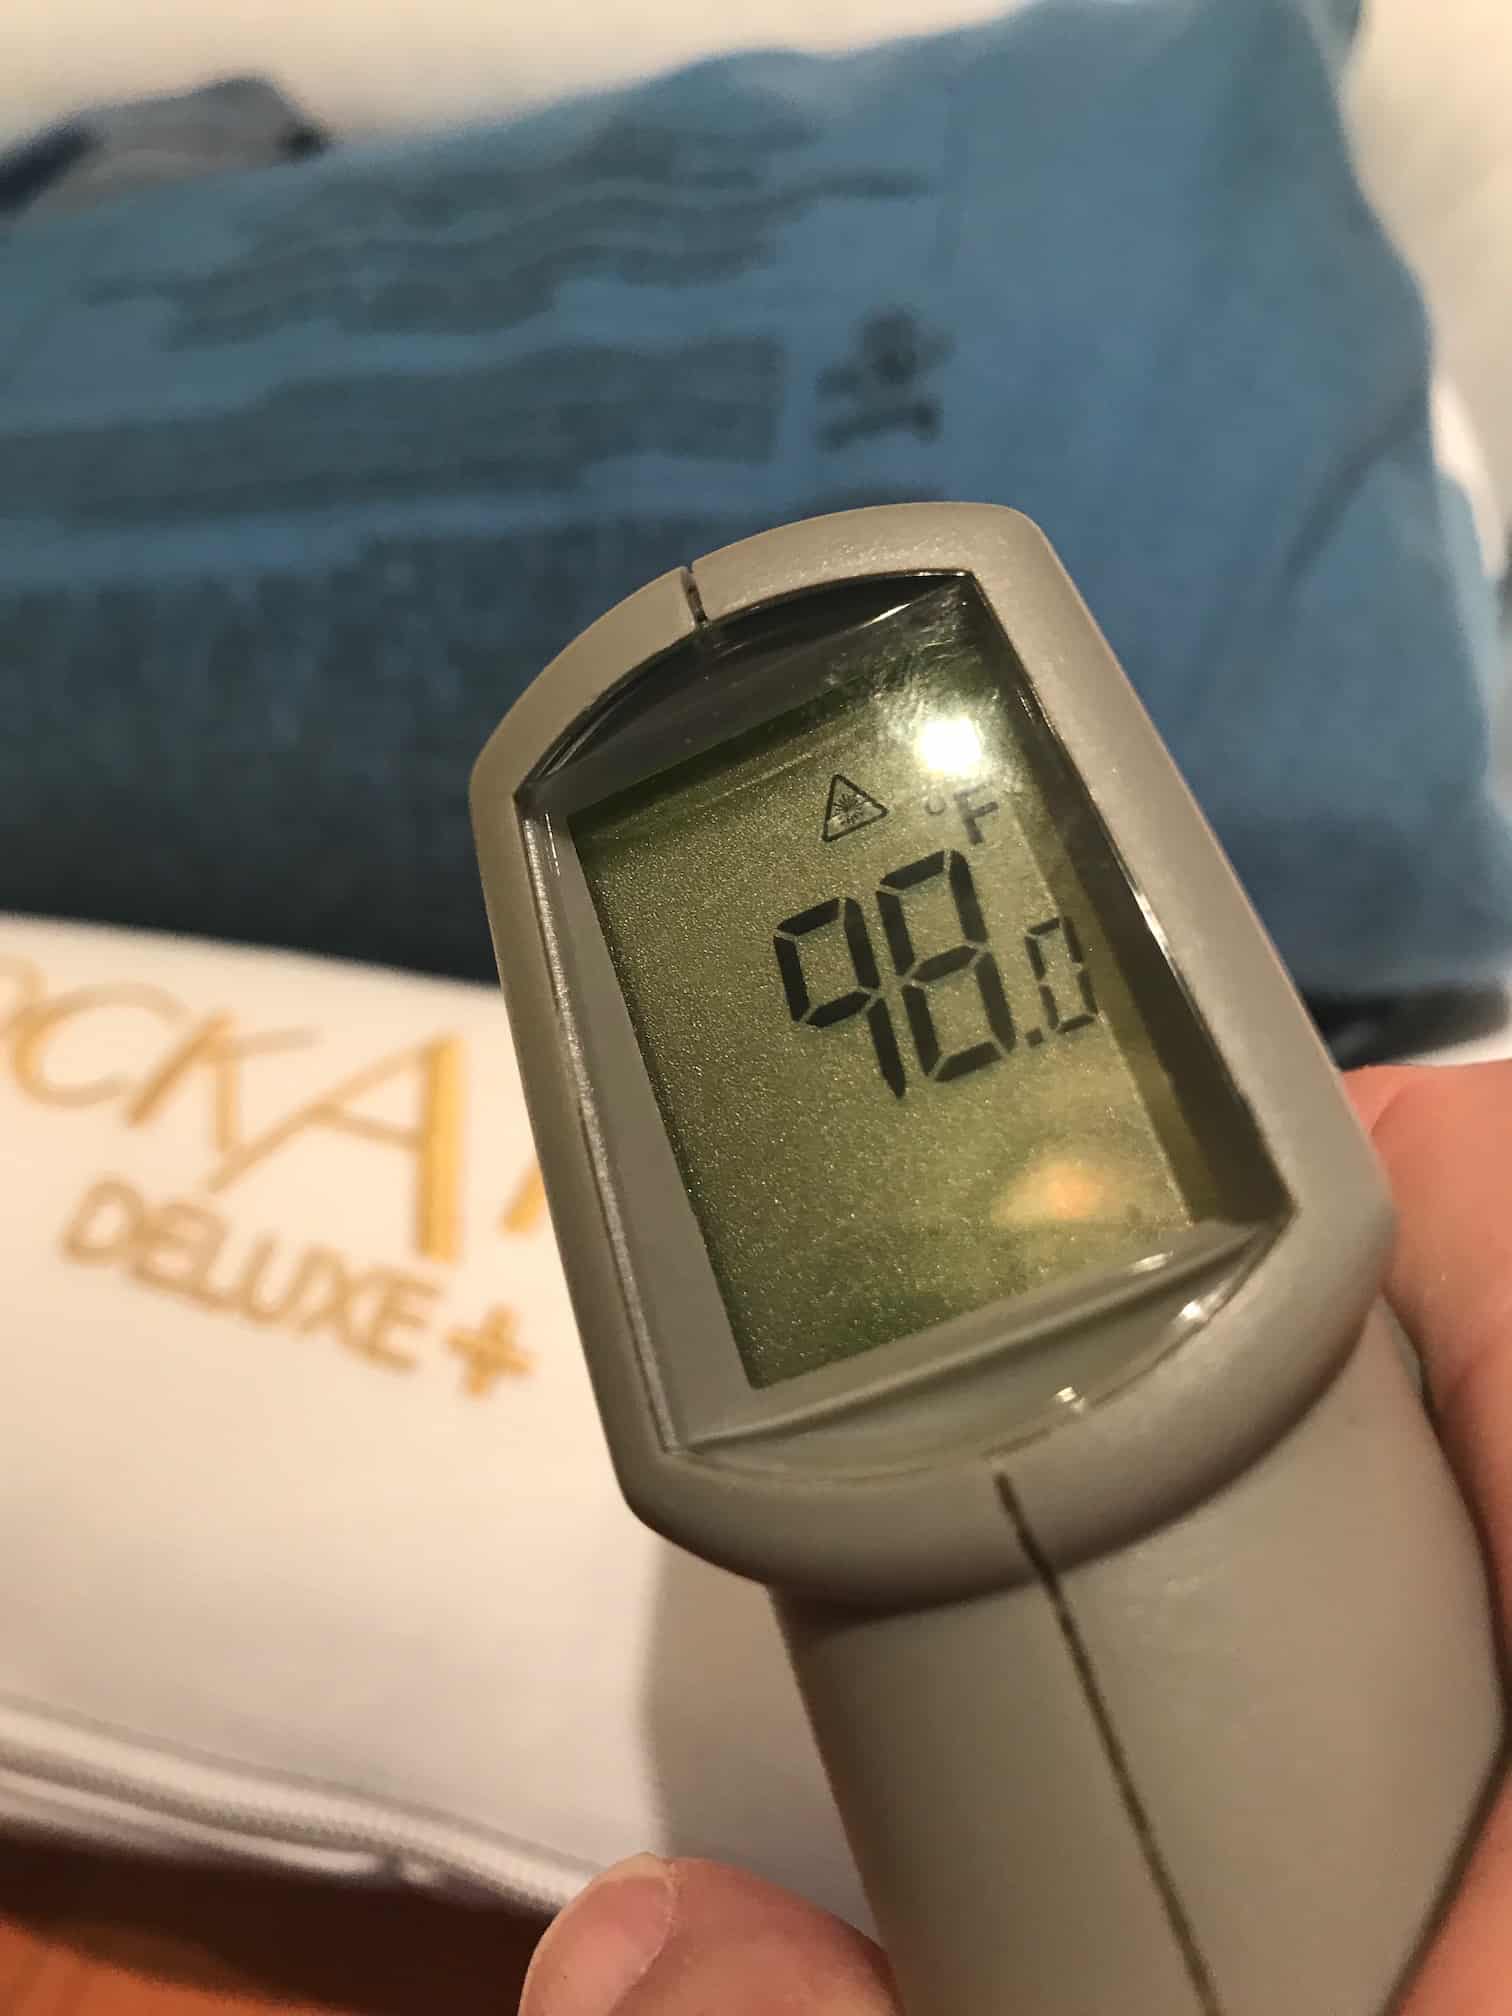 Using an infrared thermometer and a heating pad, we measured how much heat was harbored by the DockATot.